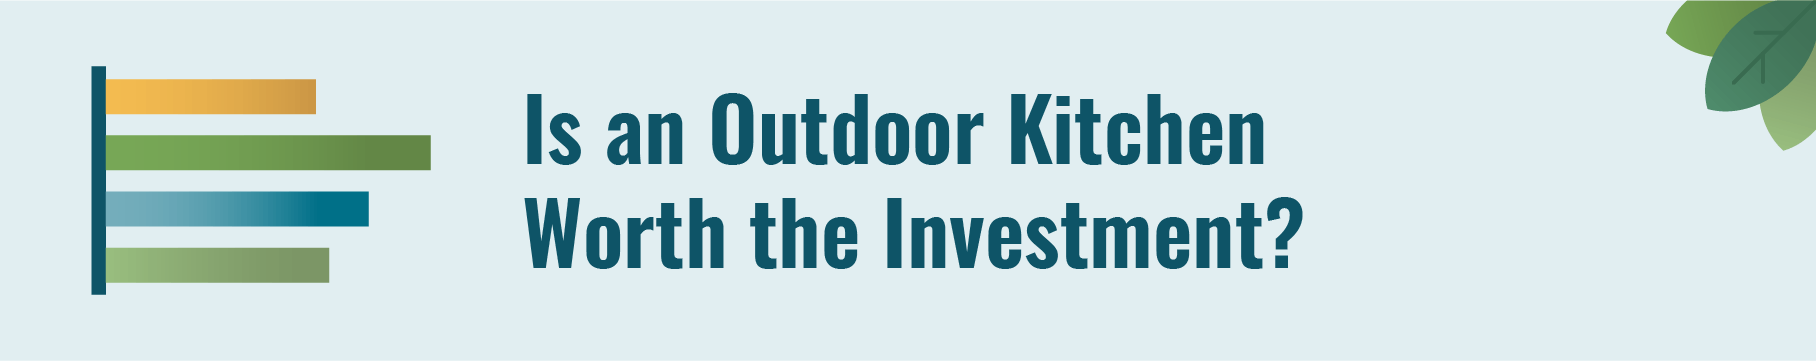 Is an outdoor kitchen worth the investment?